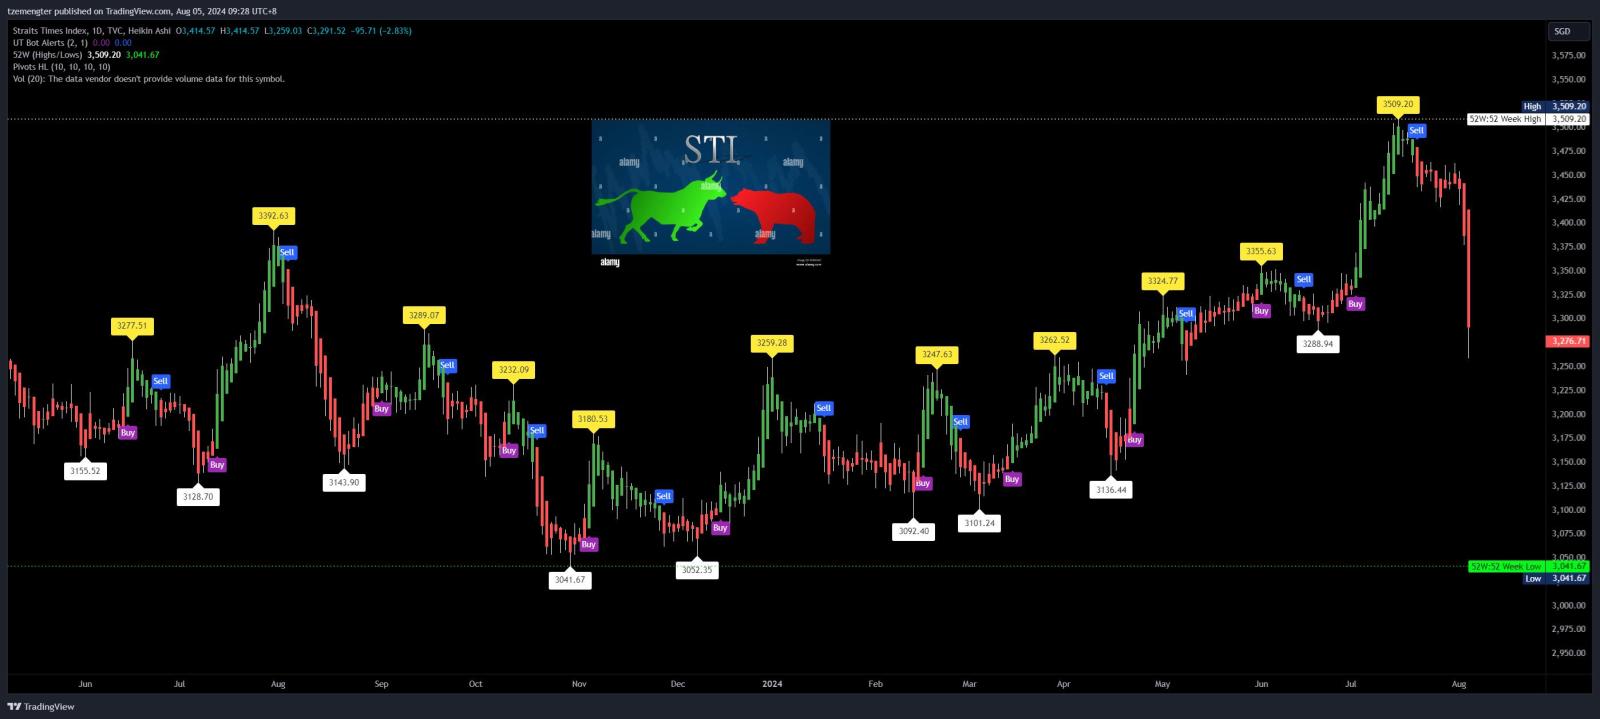 $.STI.SG$ wow... tripple digit dropped, long time never see such drop.